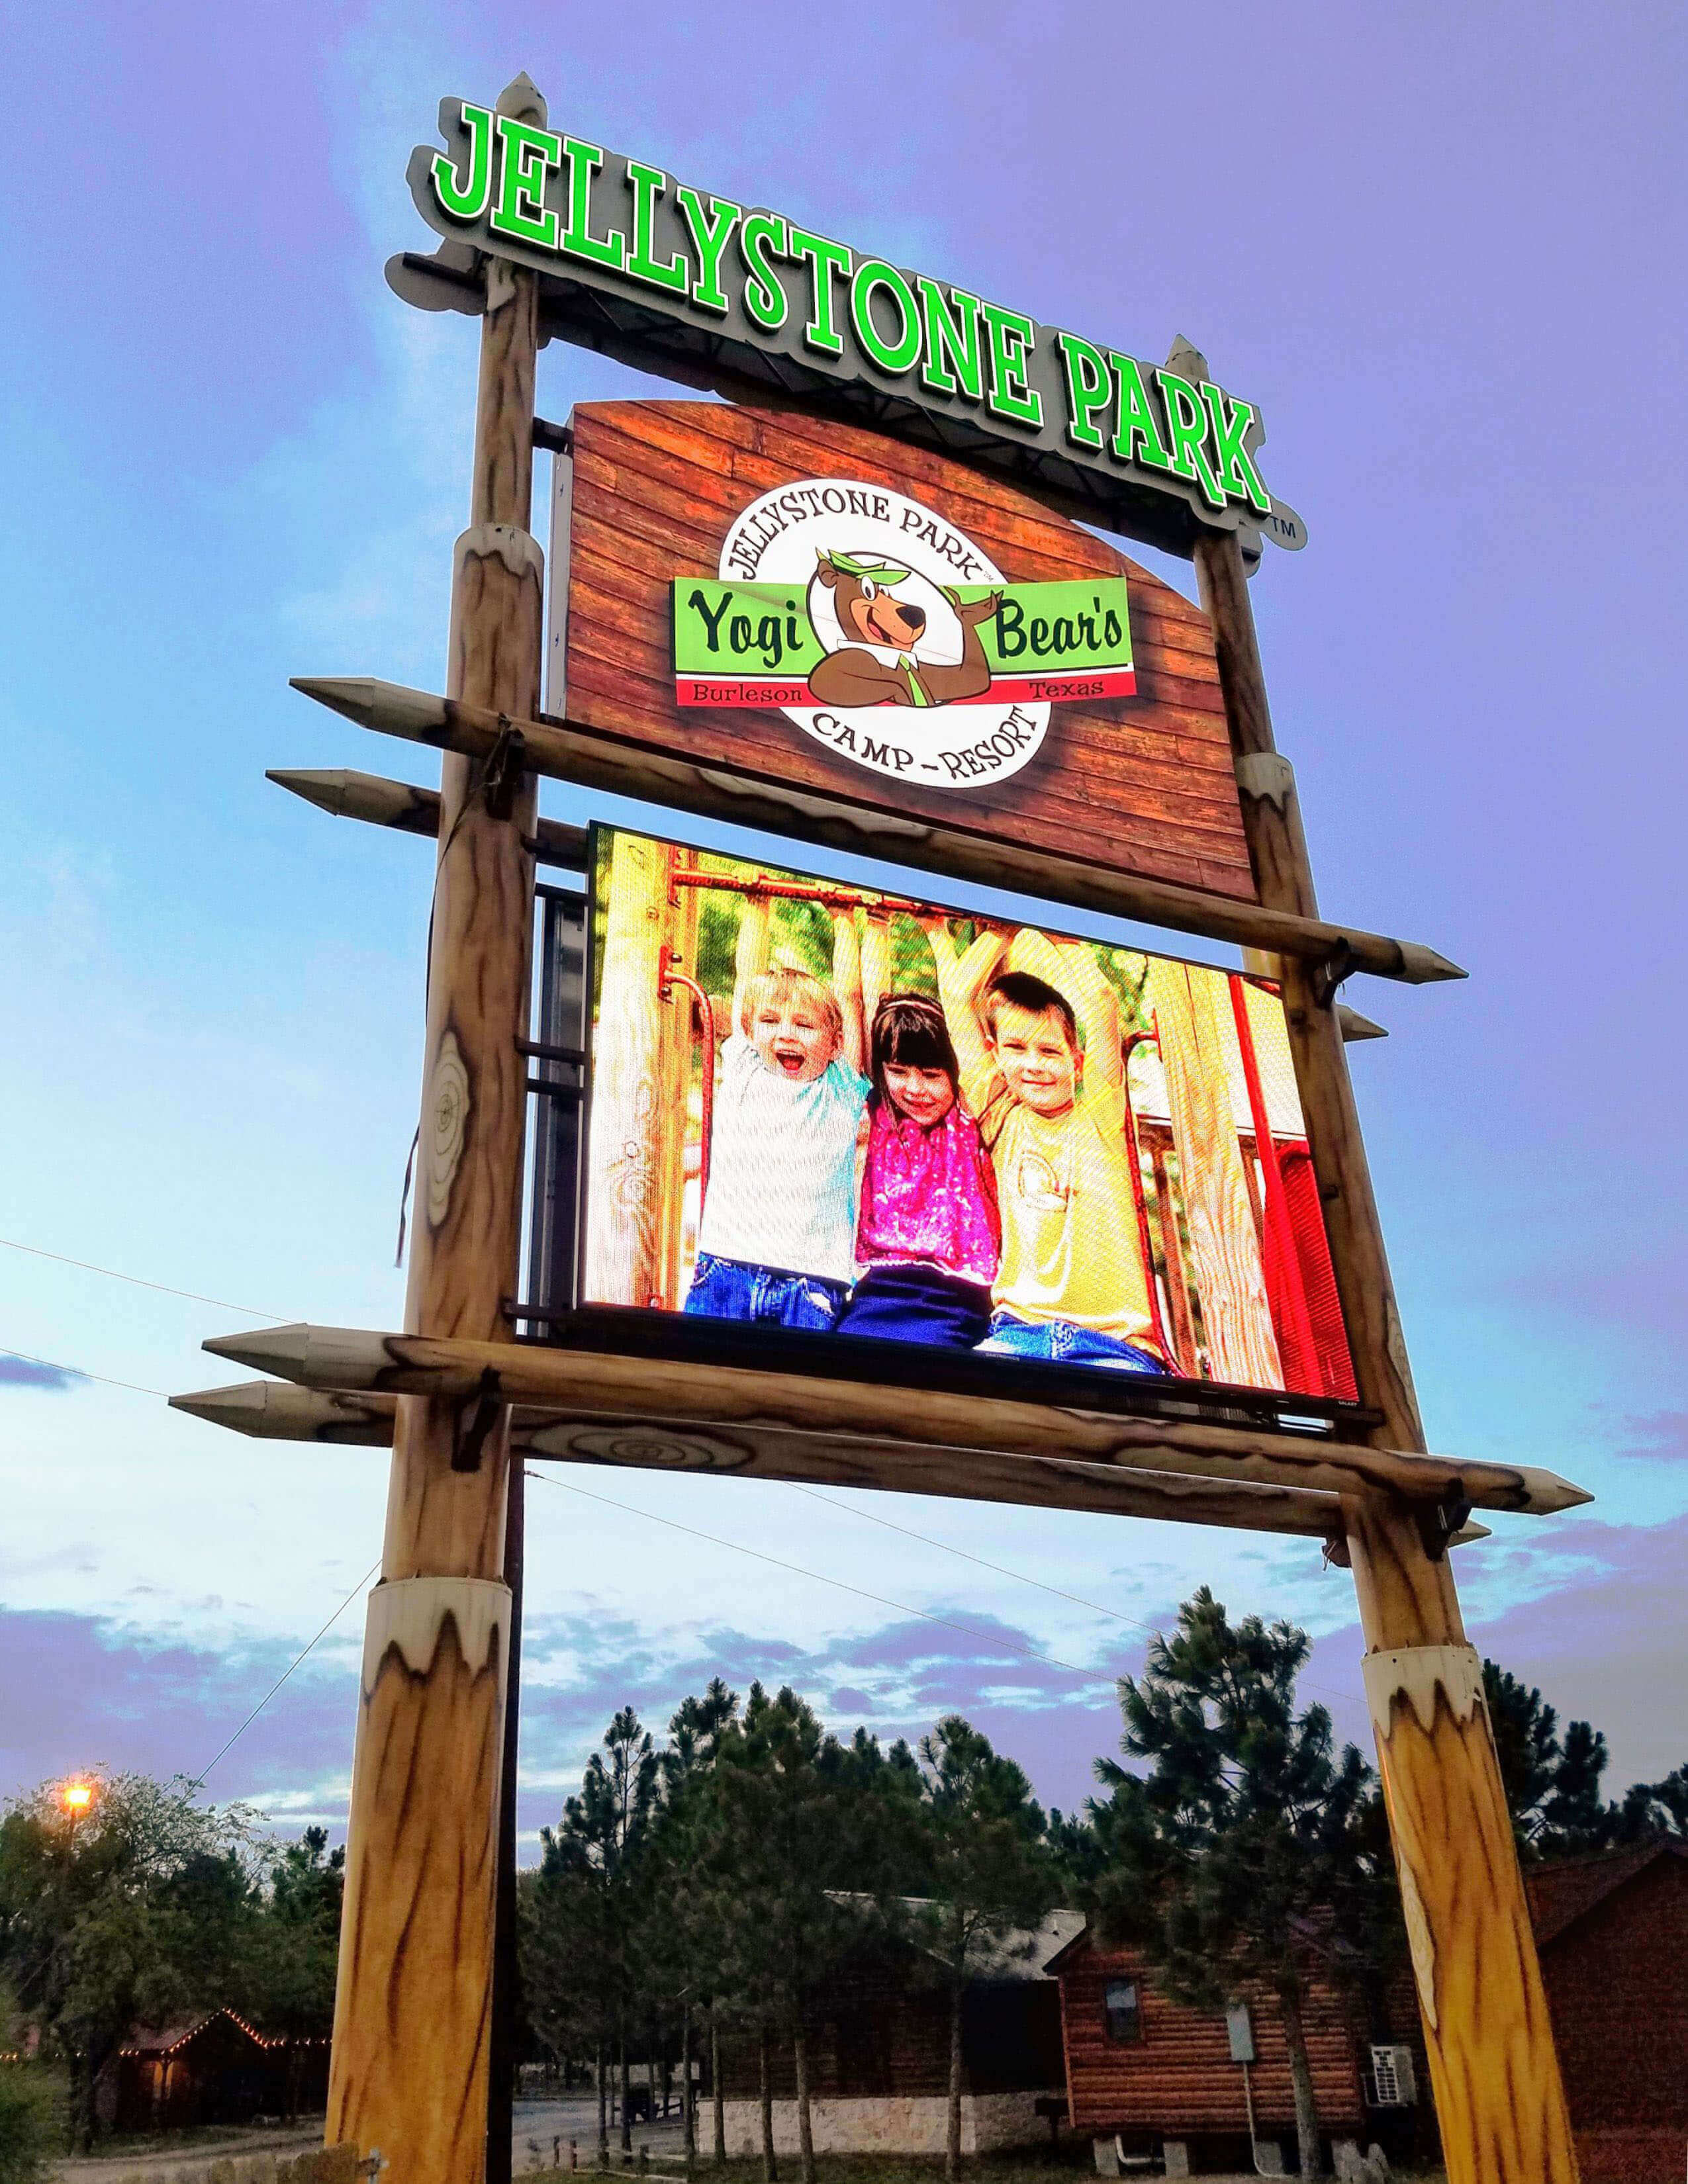 8 Ways theme parks can use digital signage + 3 Examples